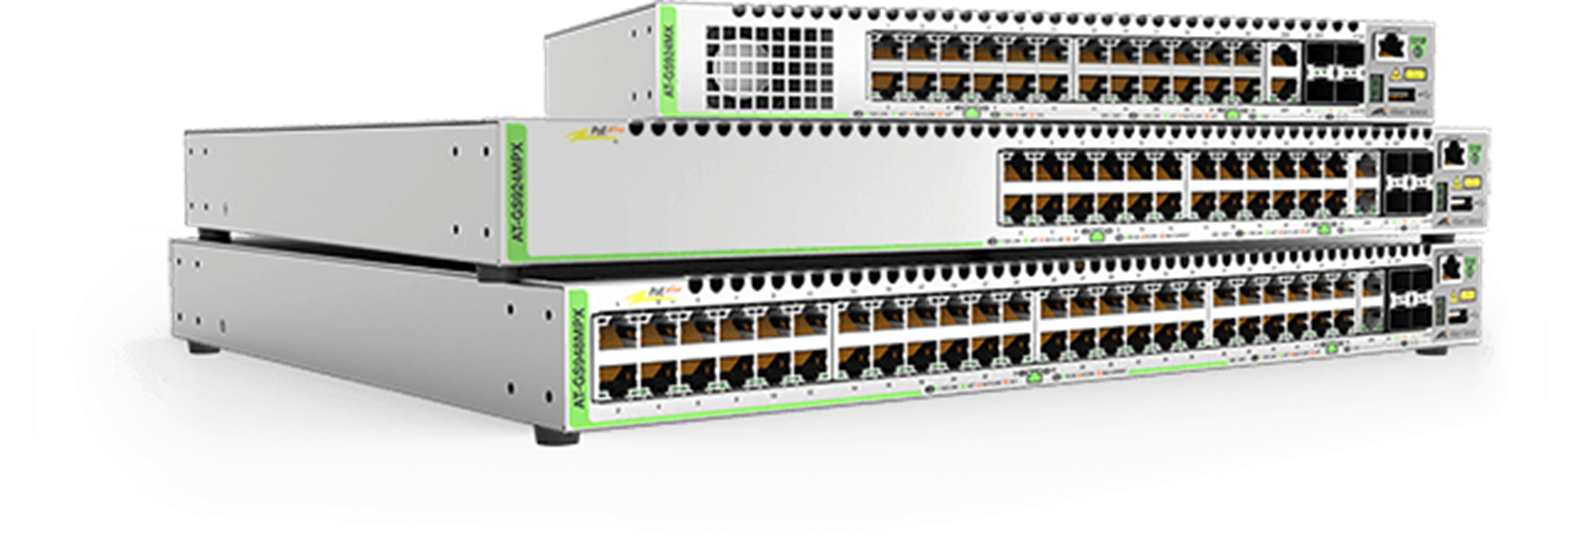 AT-GS900MX/MPX Series - Layer 2 Stackable Gigabit Switch